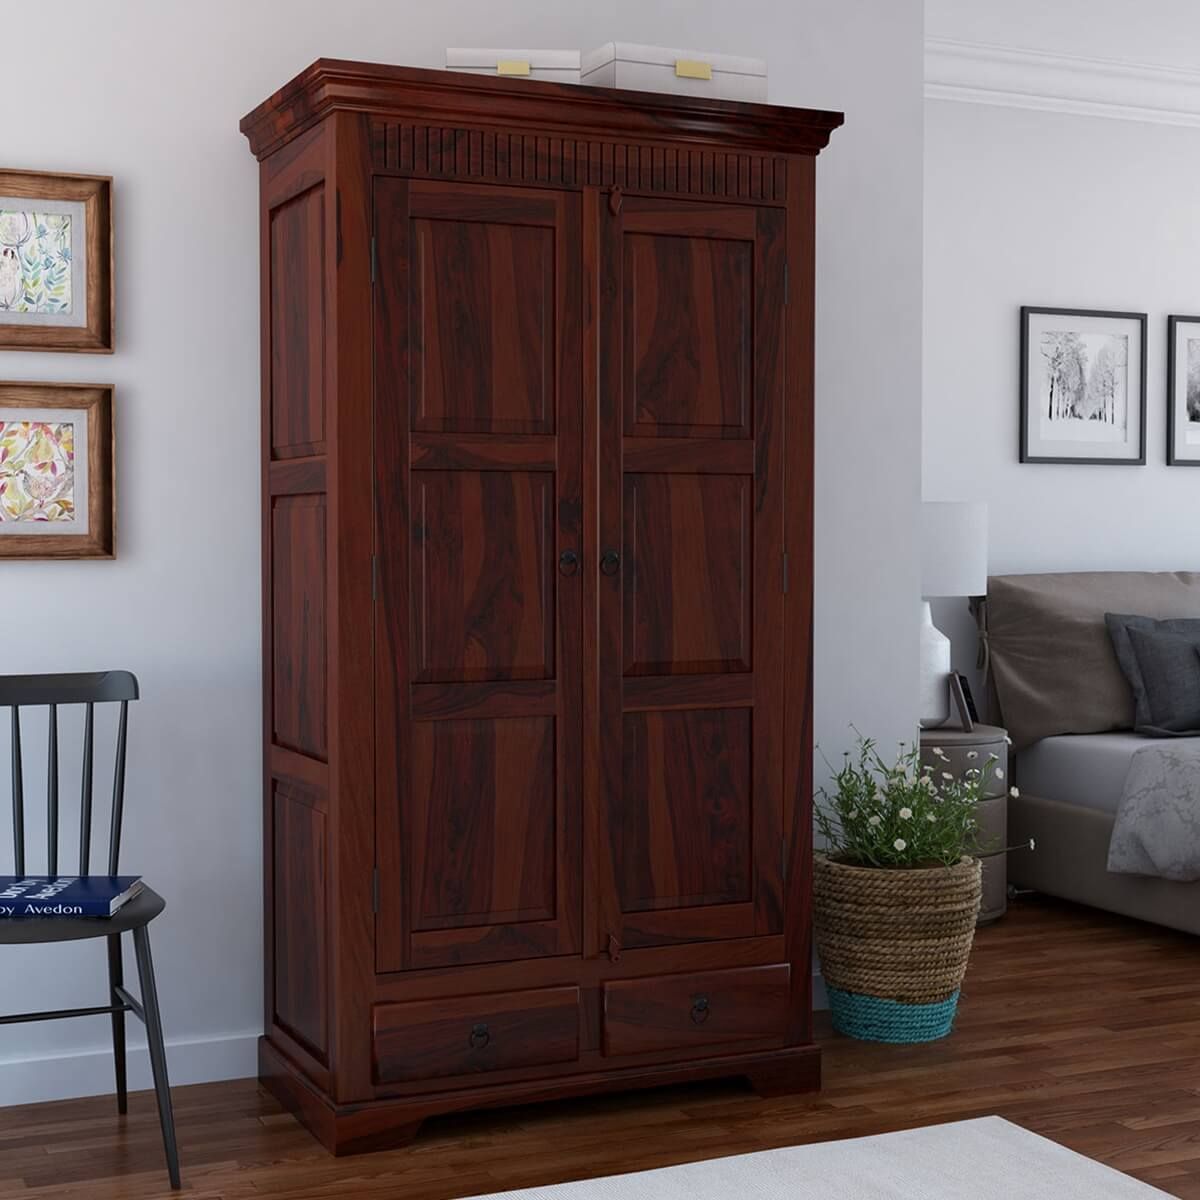 Marengo Rustic Solid Wood Large Wardrobe Armoire W Shelves And Drawers Intended For Solid Wood Wardrobes Closets (View 4 of 15)